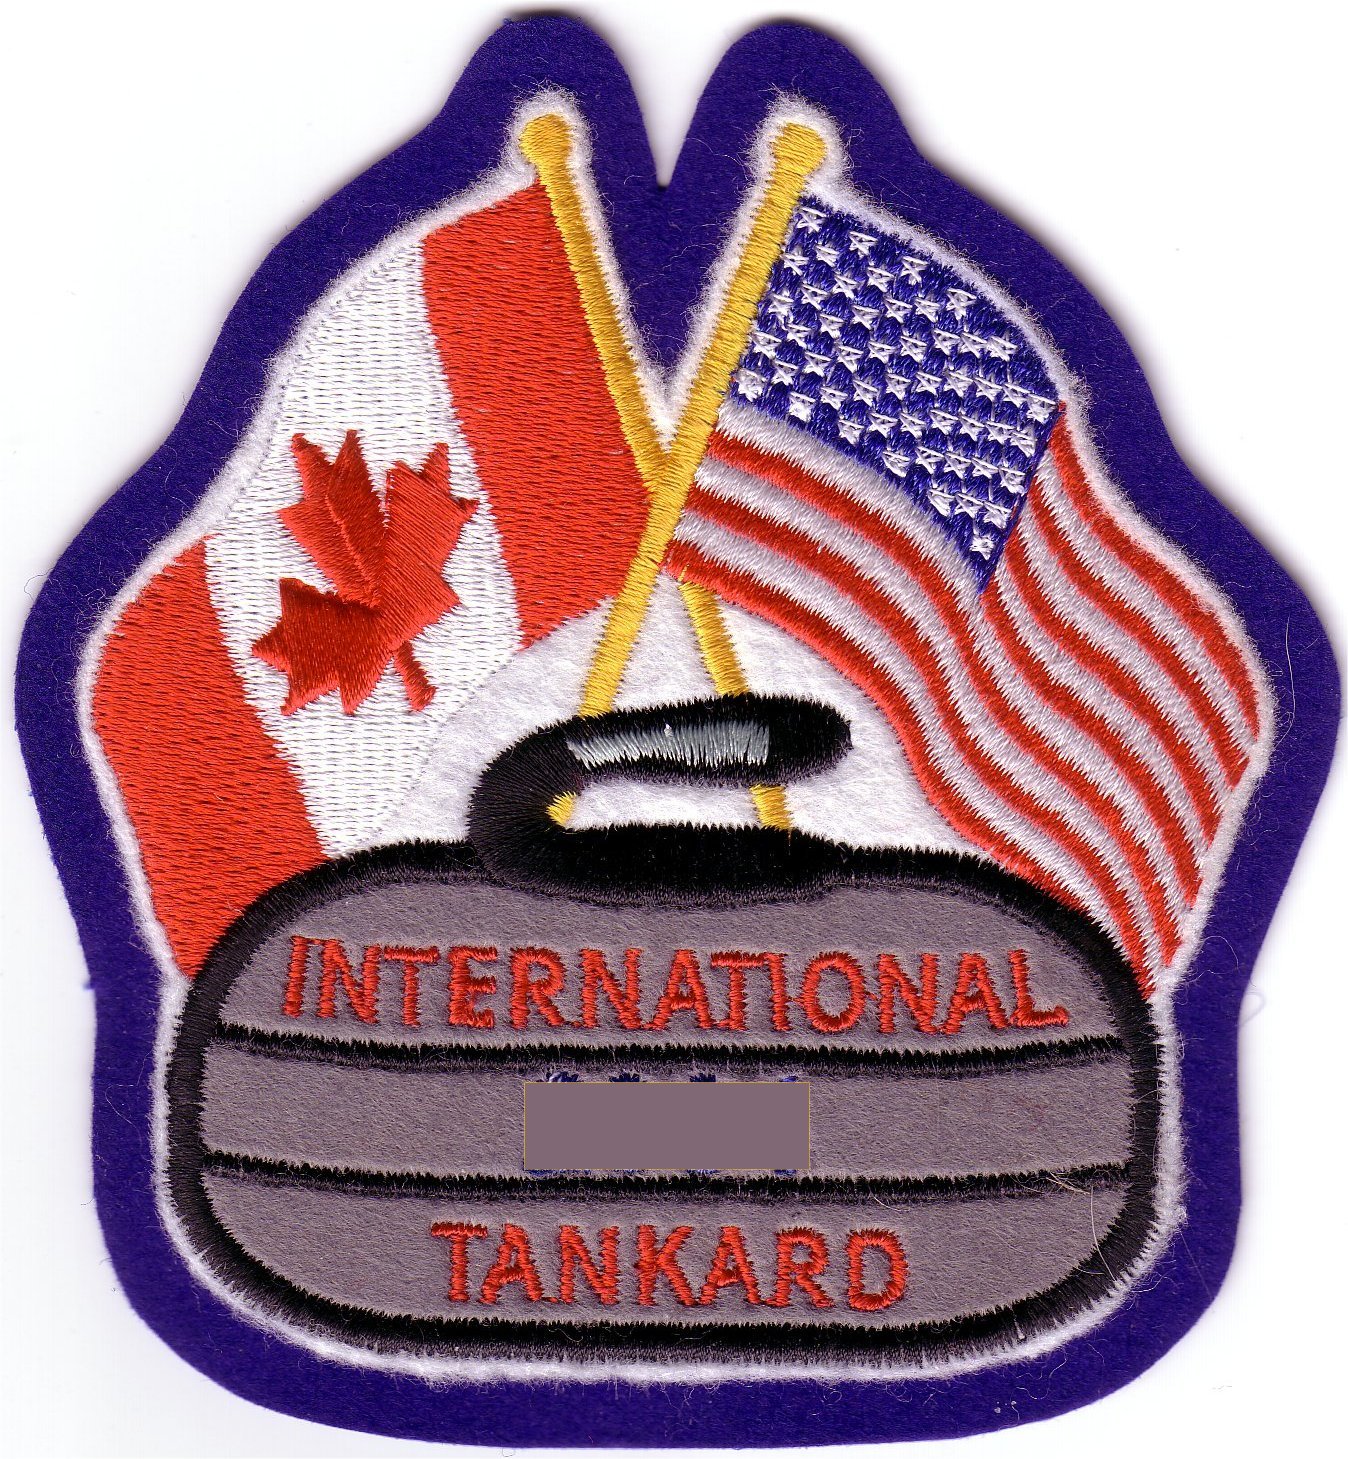 Click me to go to the International Tankard Page.